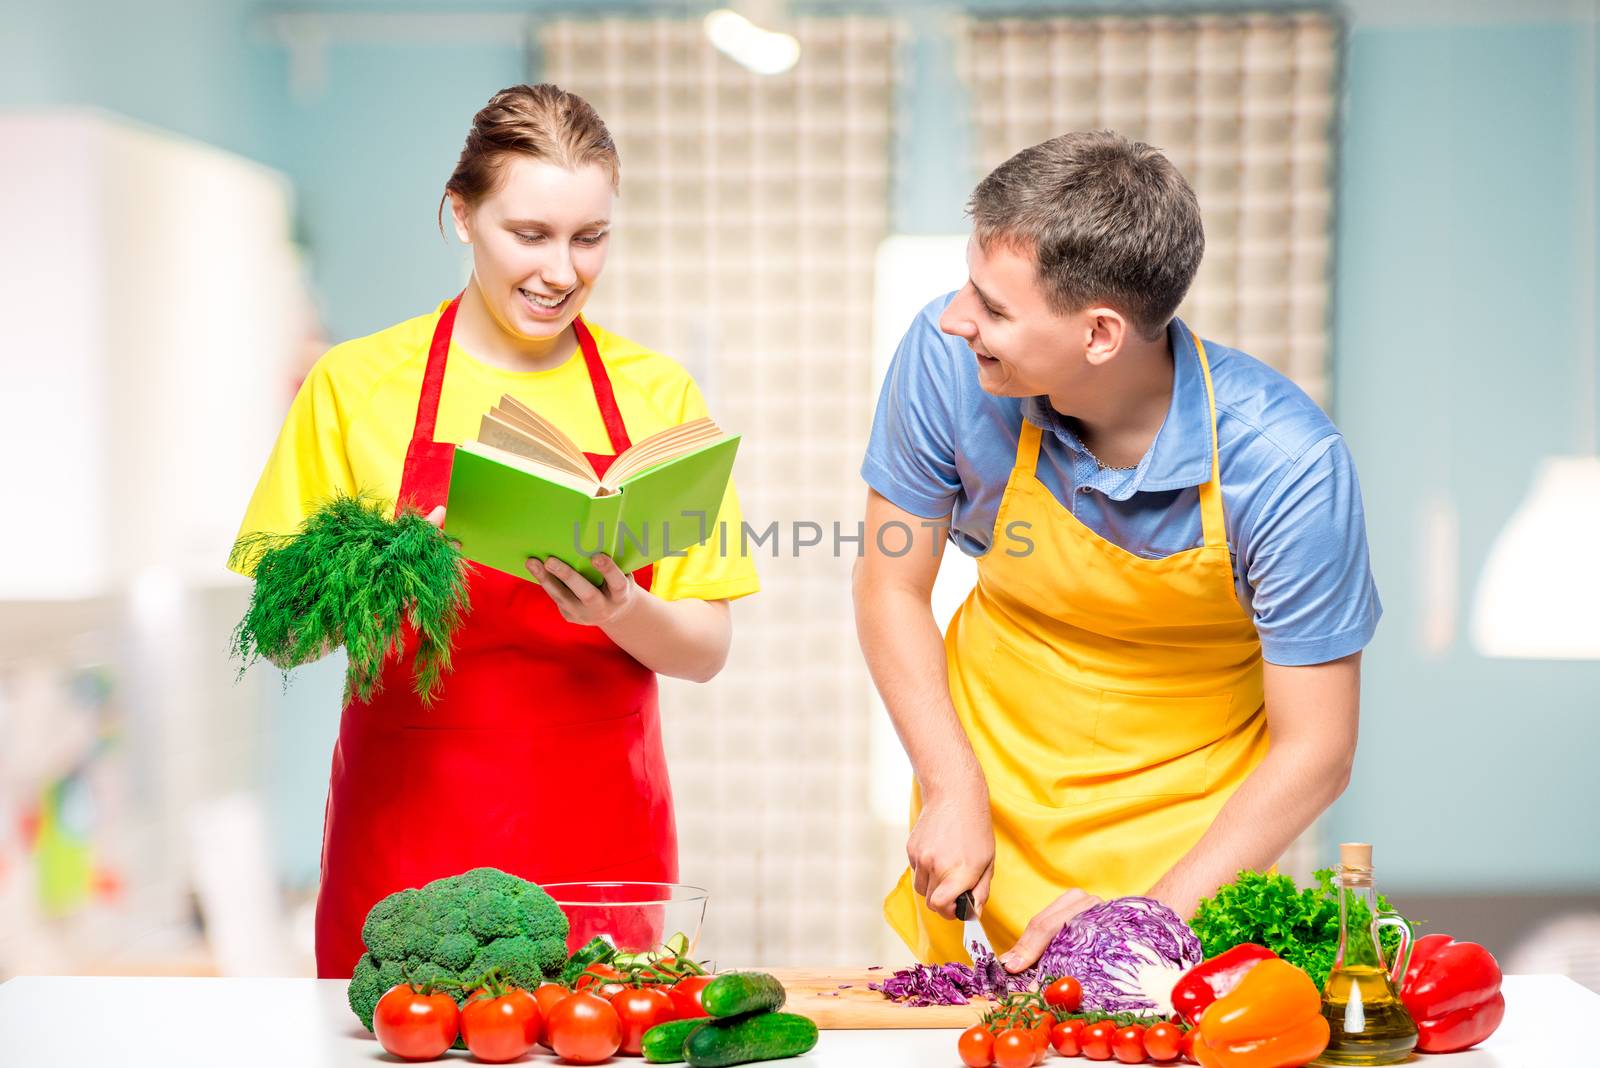 woman with a recipe book, a man cuts vegetables cooked together a salad in the kitchen